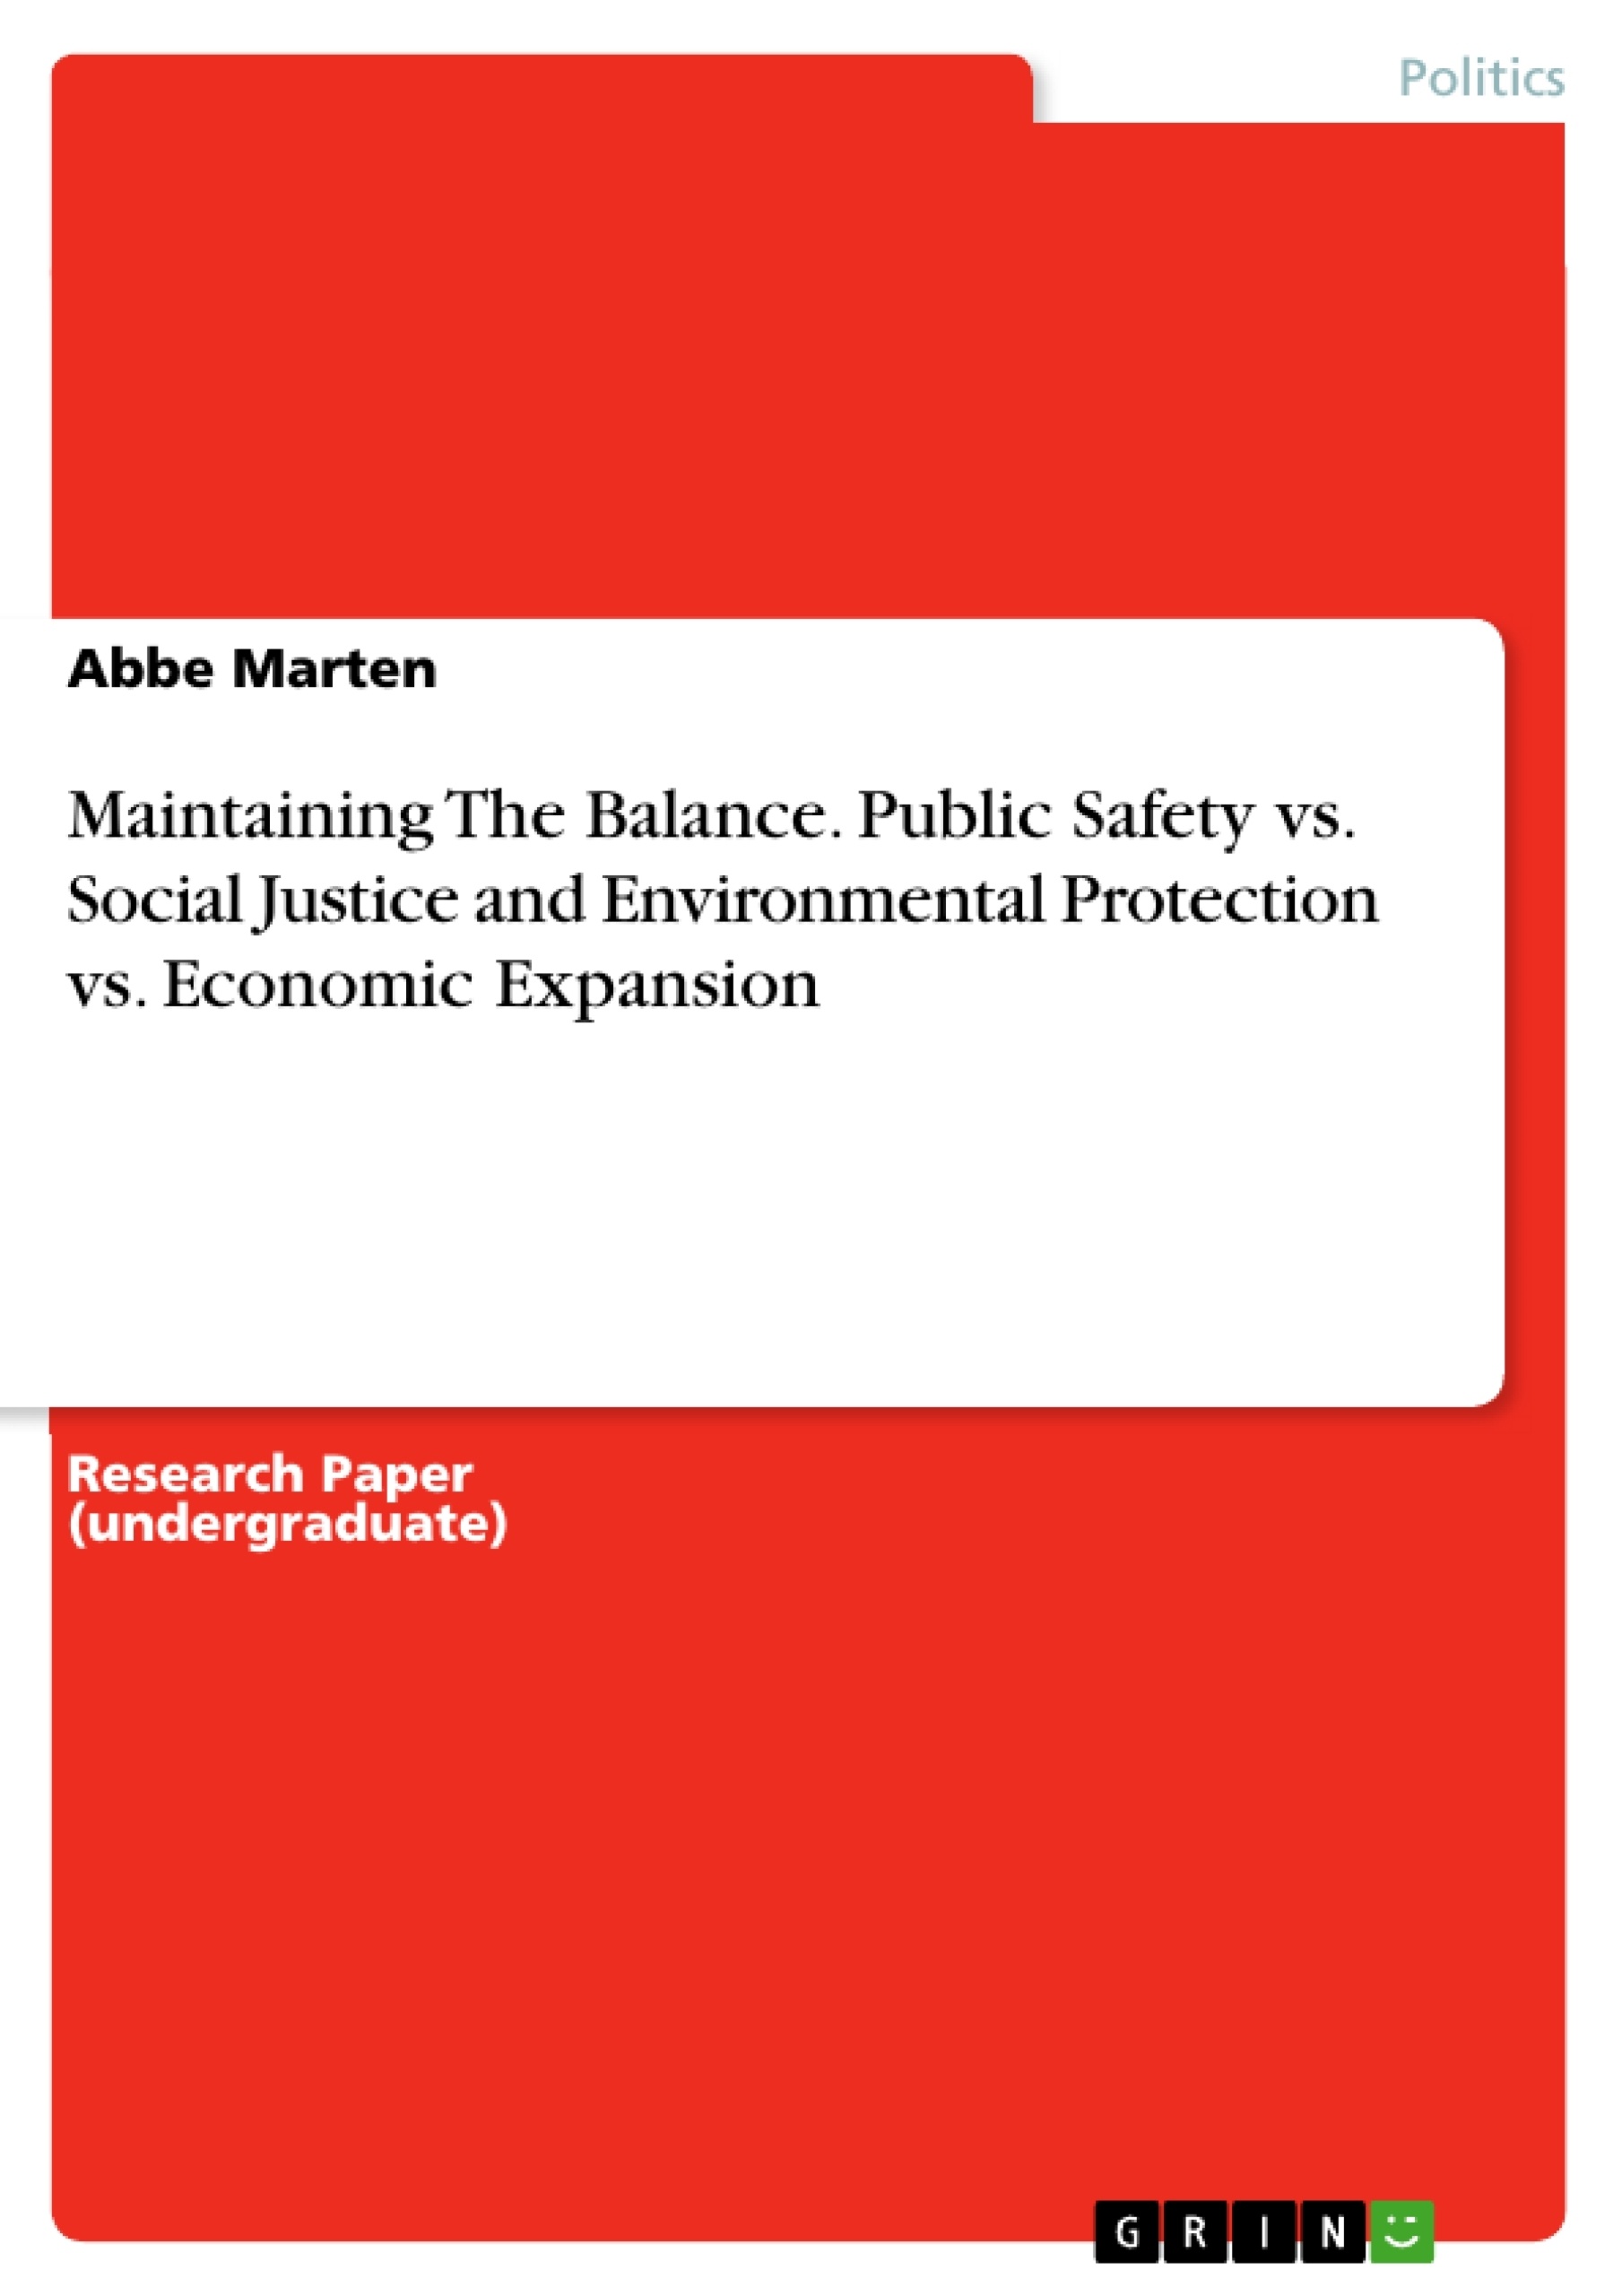 Título: Maintaining The Balance. Public Safety vs. Social Justice and Environmental Protection vs. Economic Expansion